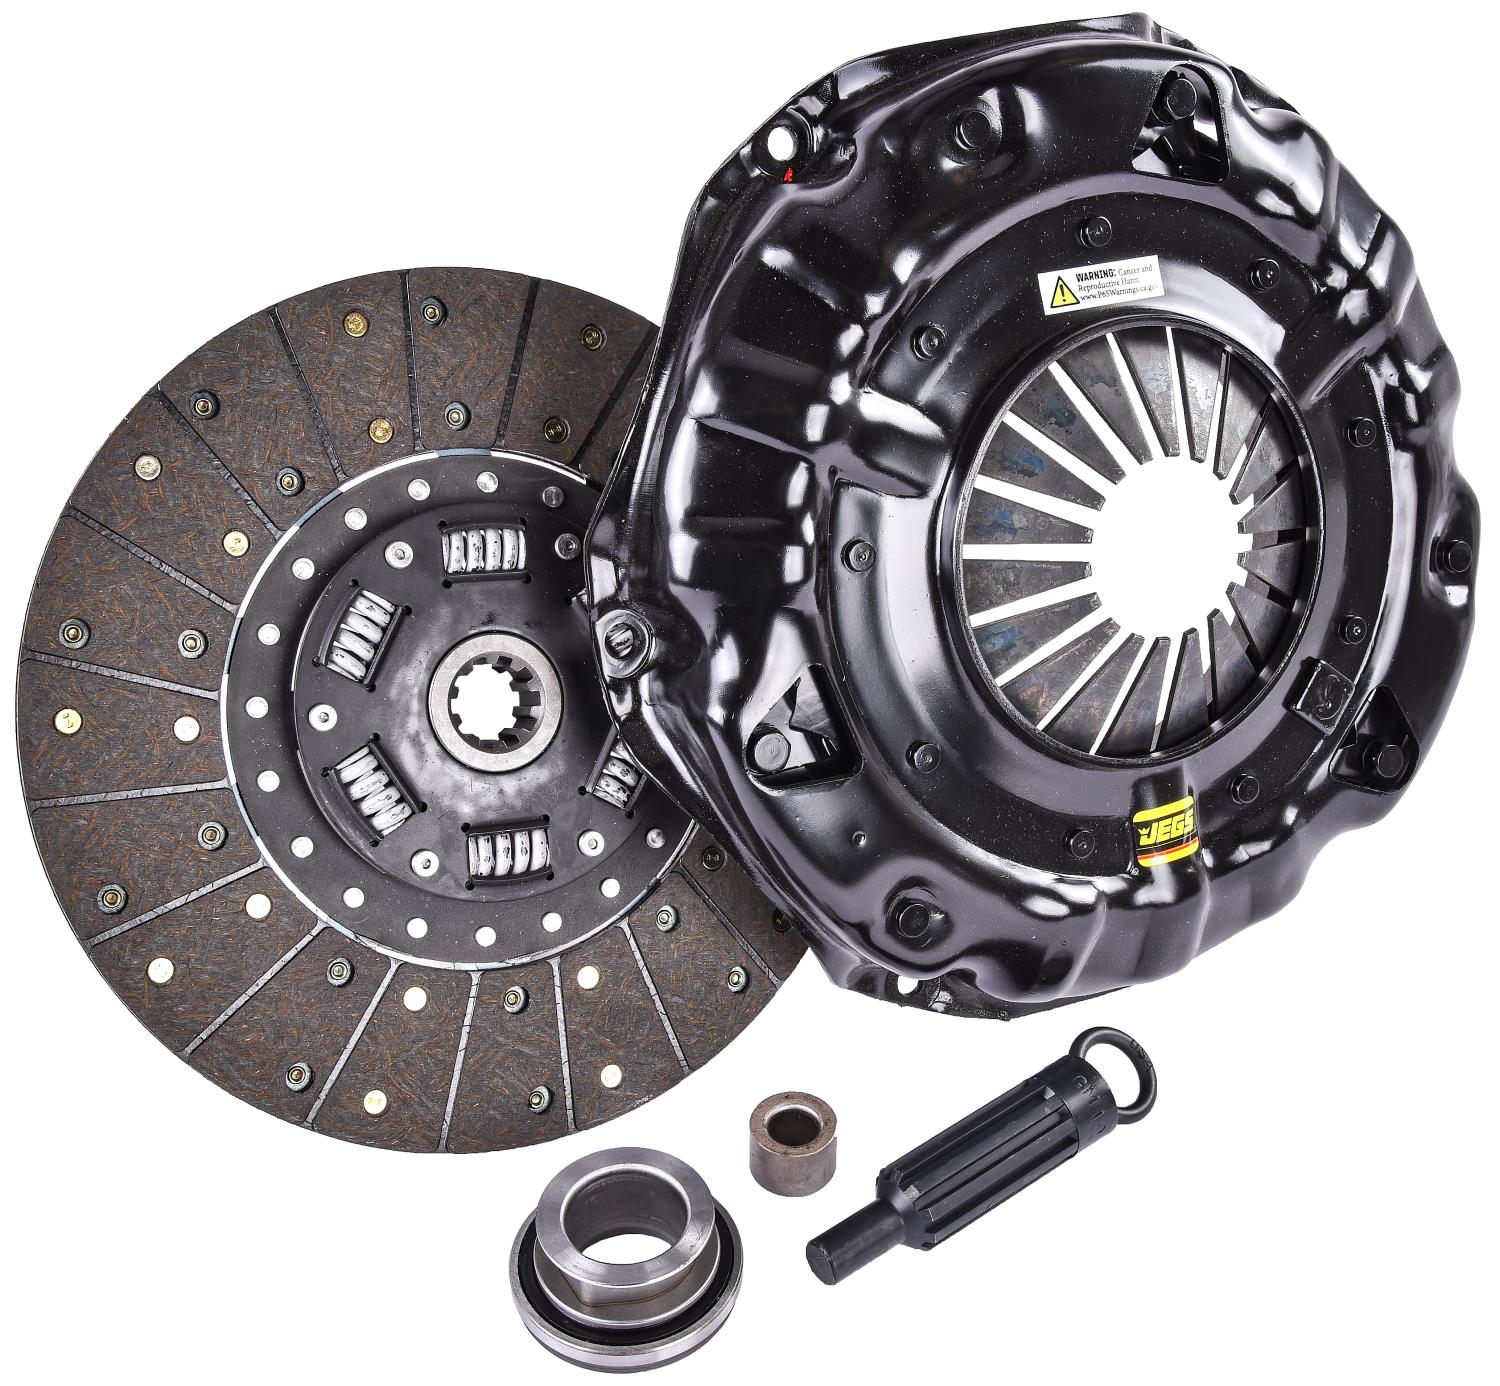 Street Performance Clutch Kit for Select 1959-1990 GM Models with a V8 Engine [11 in. Diameter, 1 1/8 in. x 10-Spline]